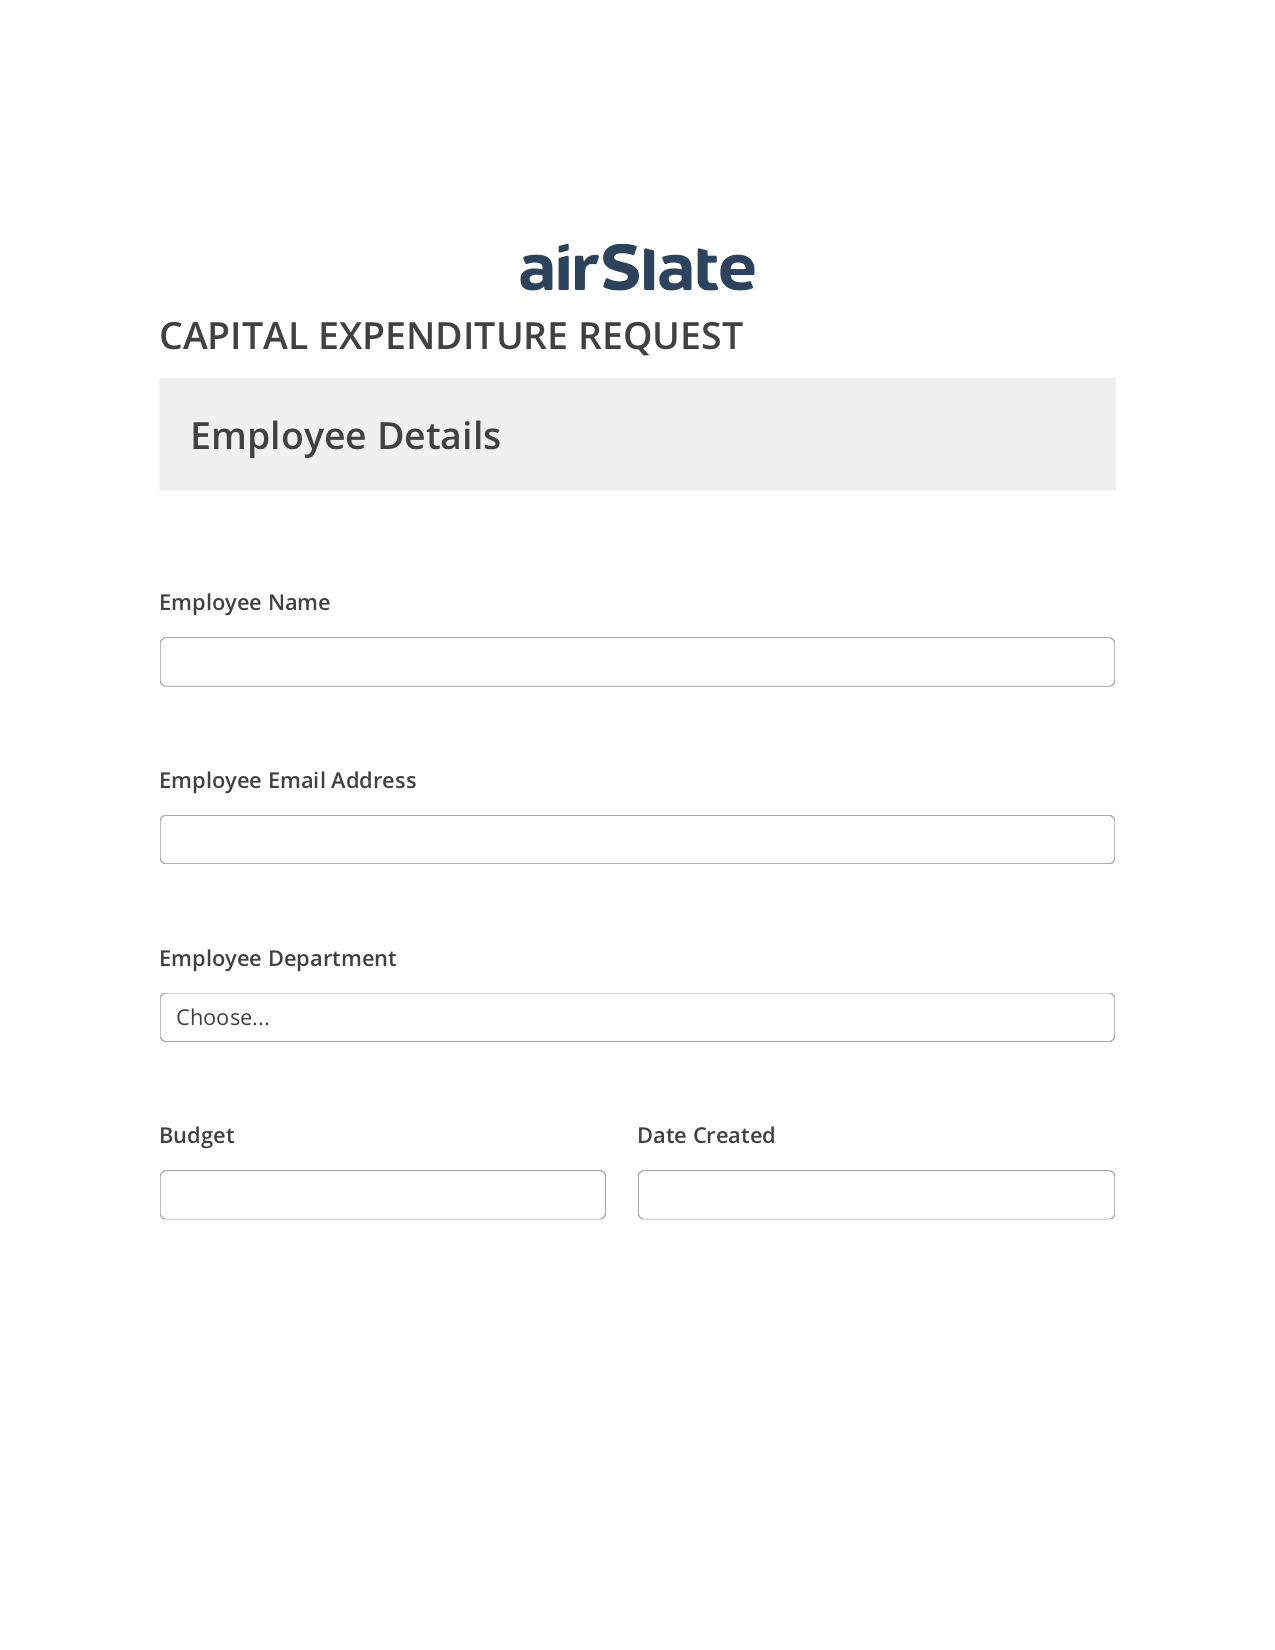 Capital Expenditure Request Approval Workflow Pre-fill Slate from MS Dynamics 365 record, Create Salesforce Record Bot, Export to Smartsheet